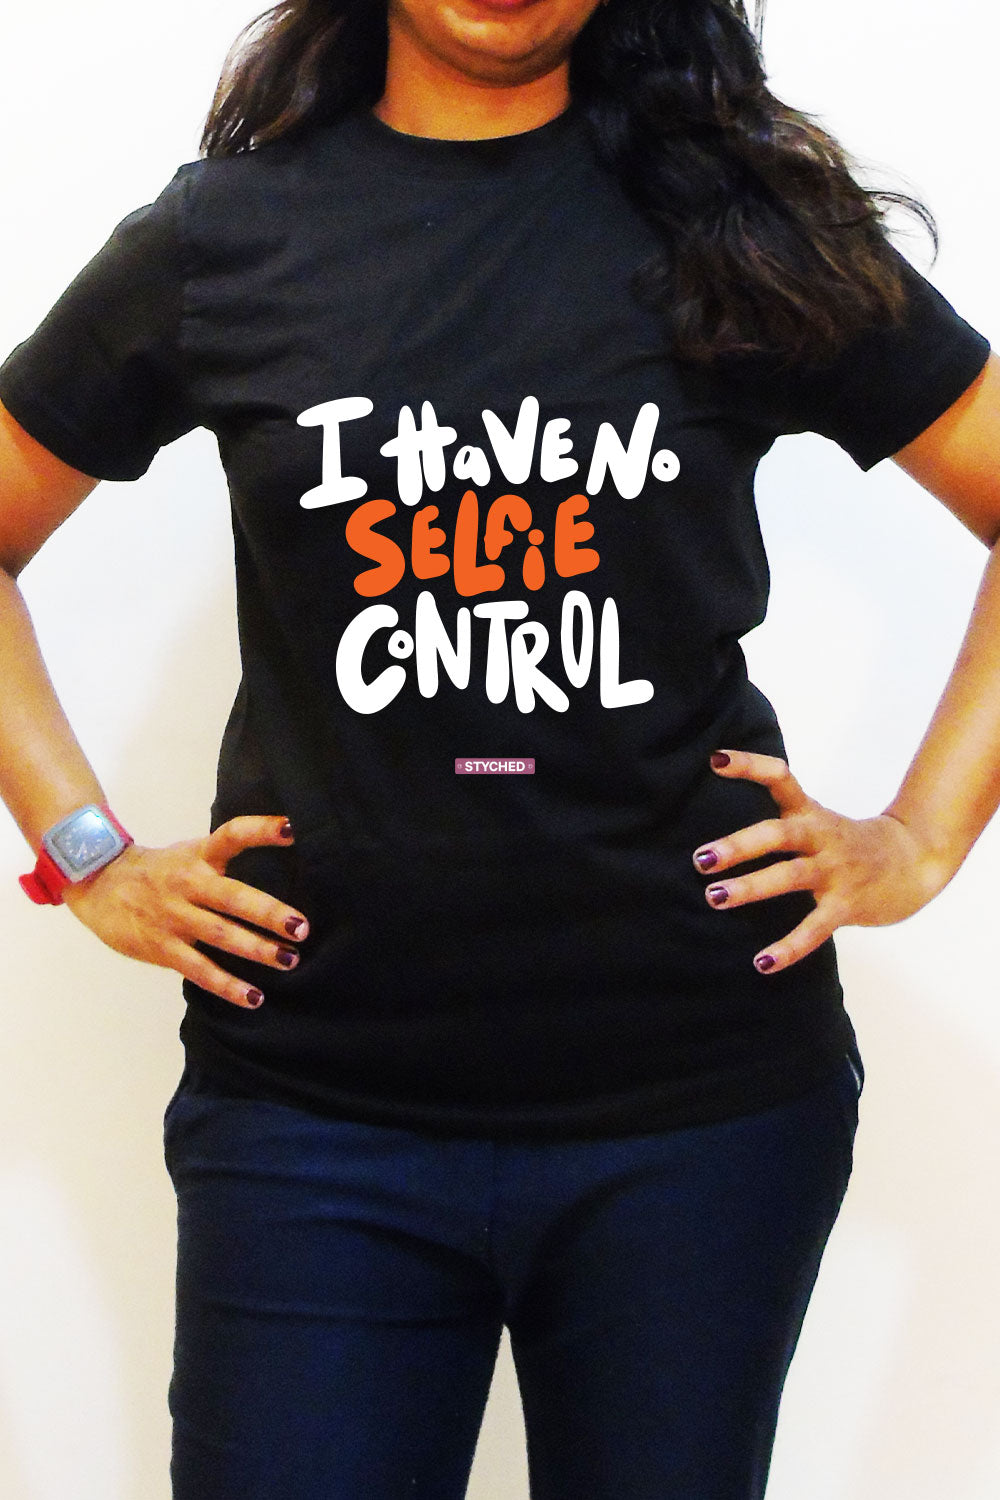 I have no selfie control - Quirky Graphic T-Shirt Black Color